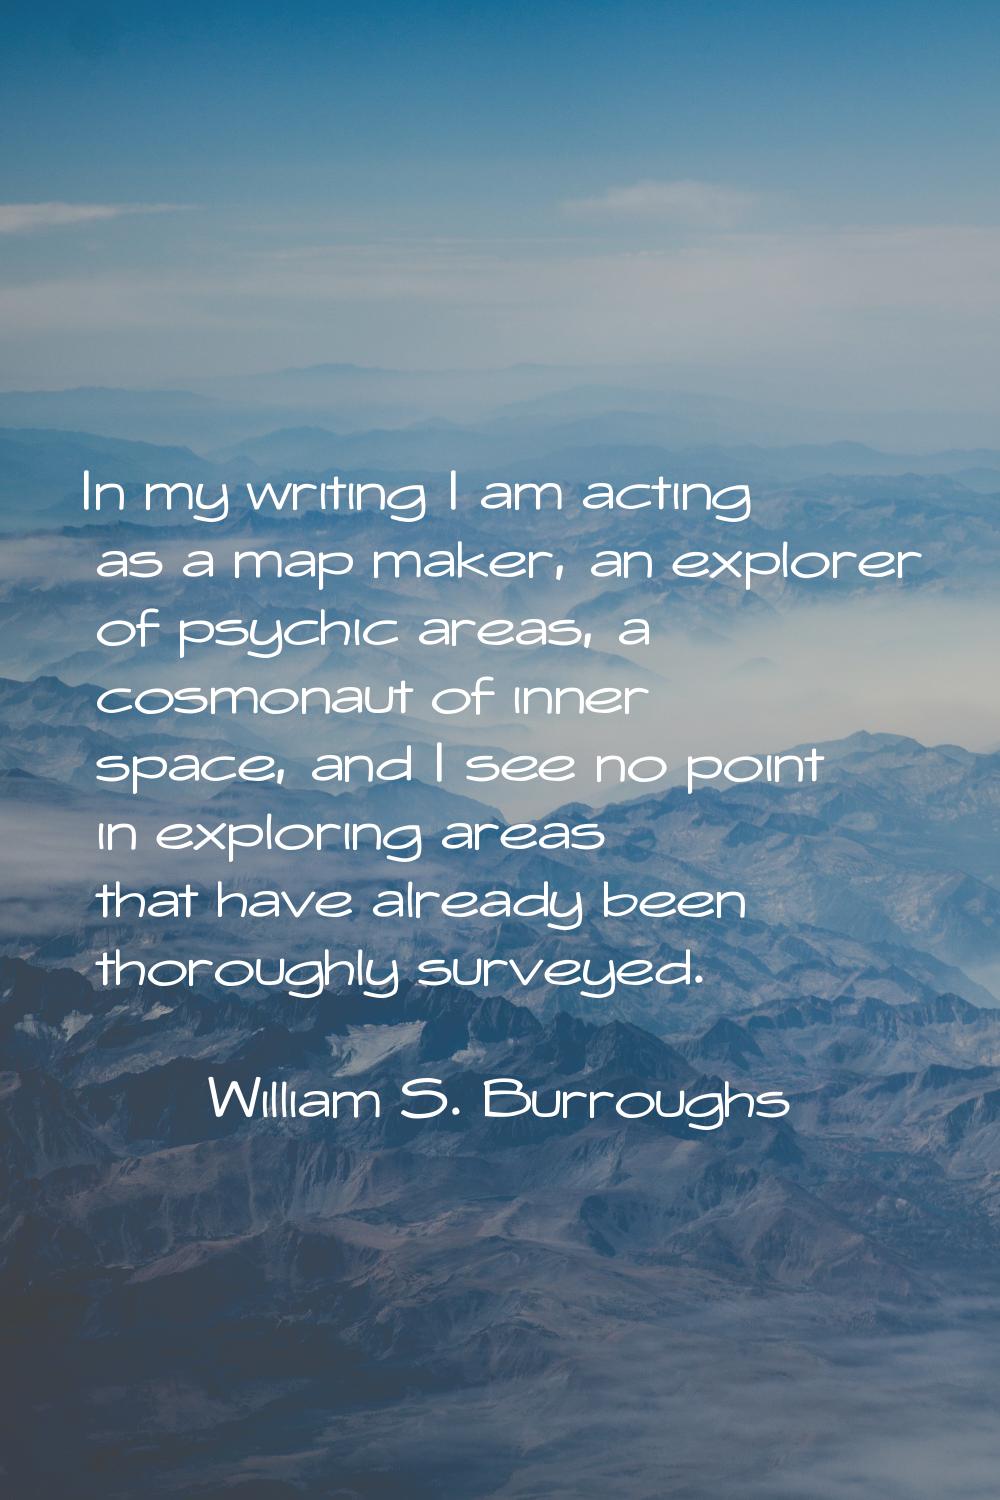 In my writing I am acting as a map maker, an explorer of psychic areas, a cosmonaut of inner space,